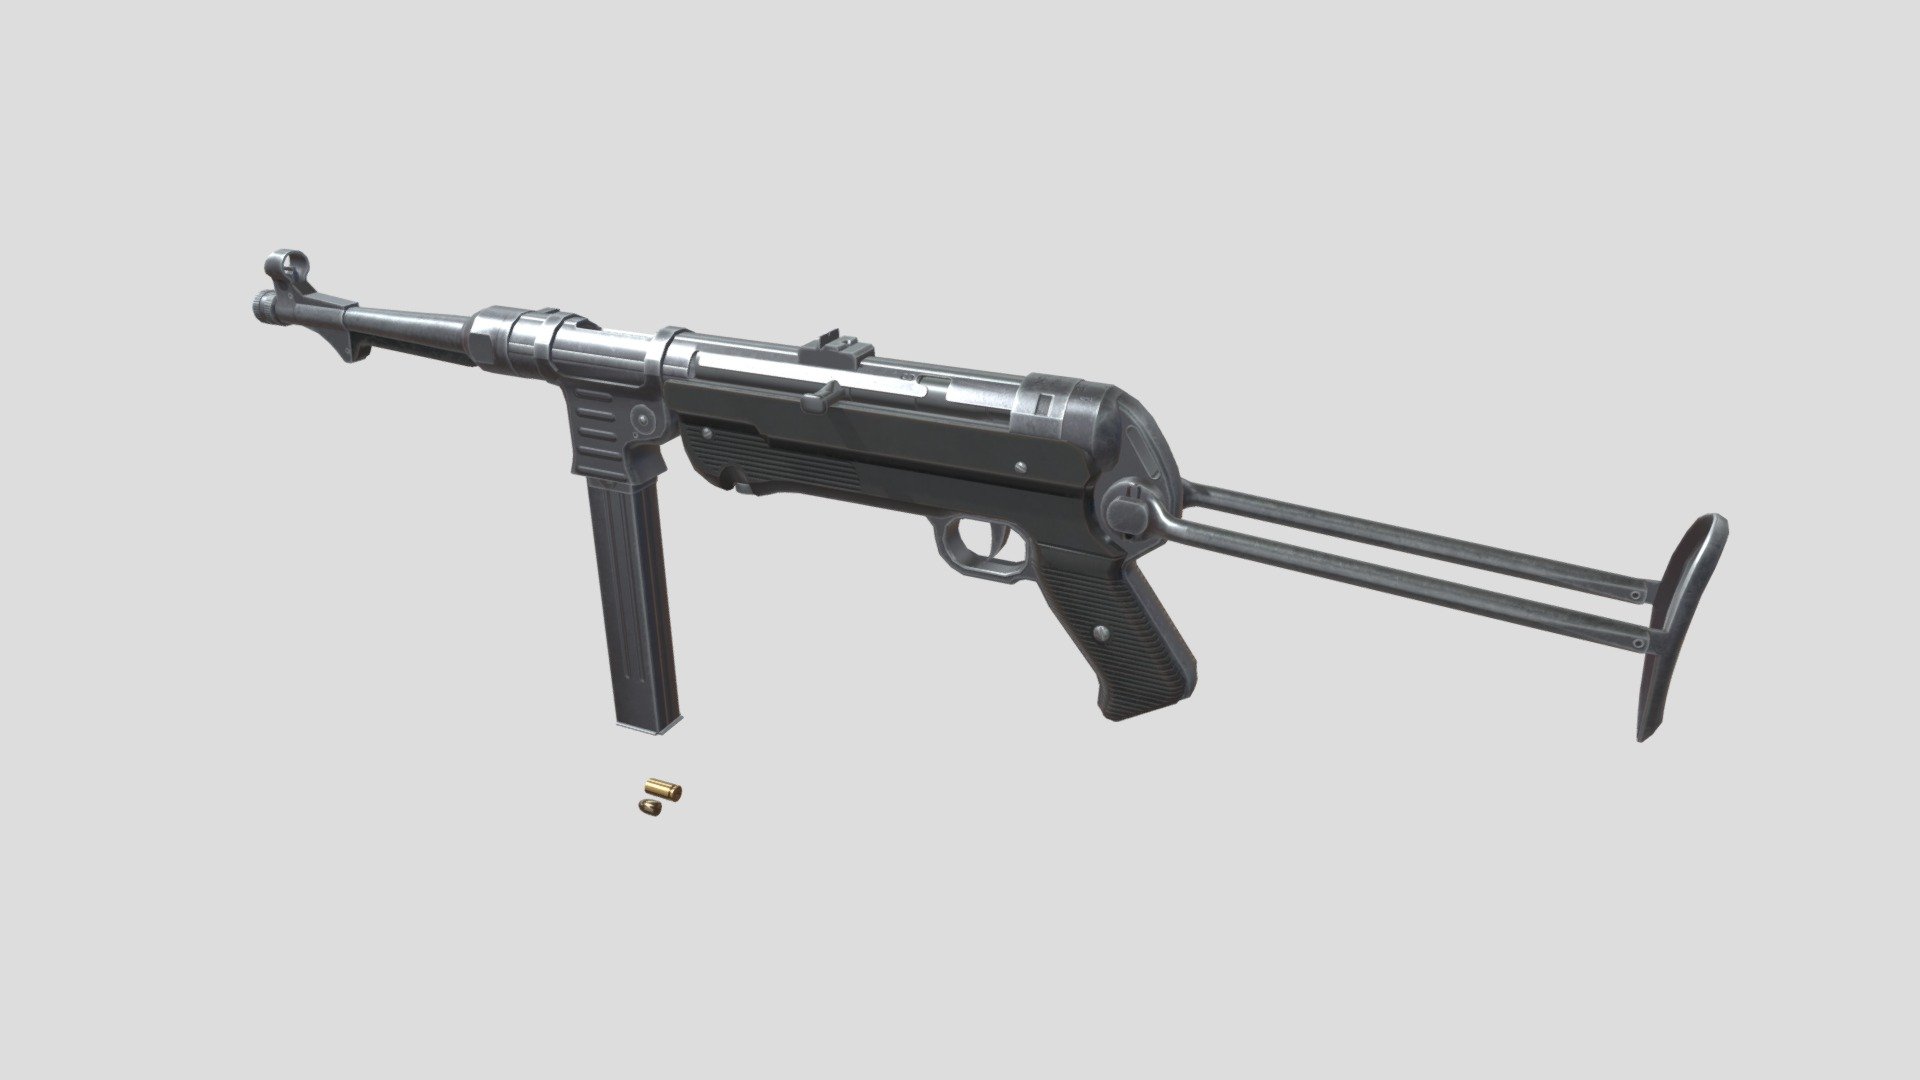 A low-poly World War II German MP 40 Submachine-gun asset for use in game development projects. Included is a 9mm Luger cartridge, spent casing and bullet.

The model is in real-world scale and was created using accurate referencing from photos and videos 3d model